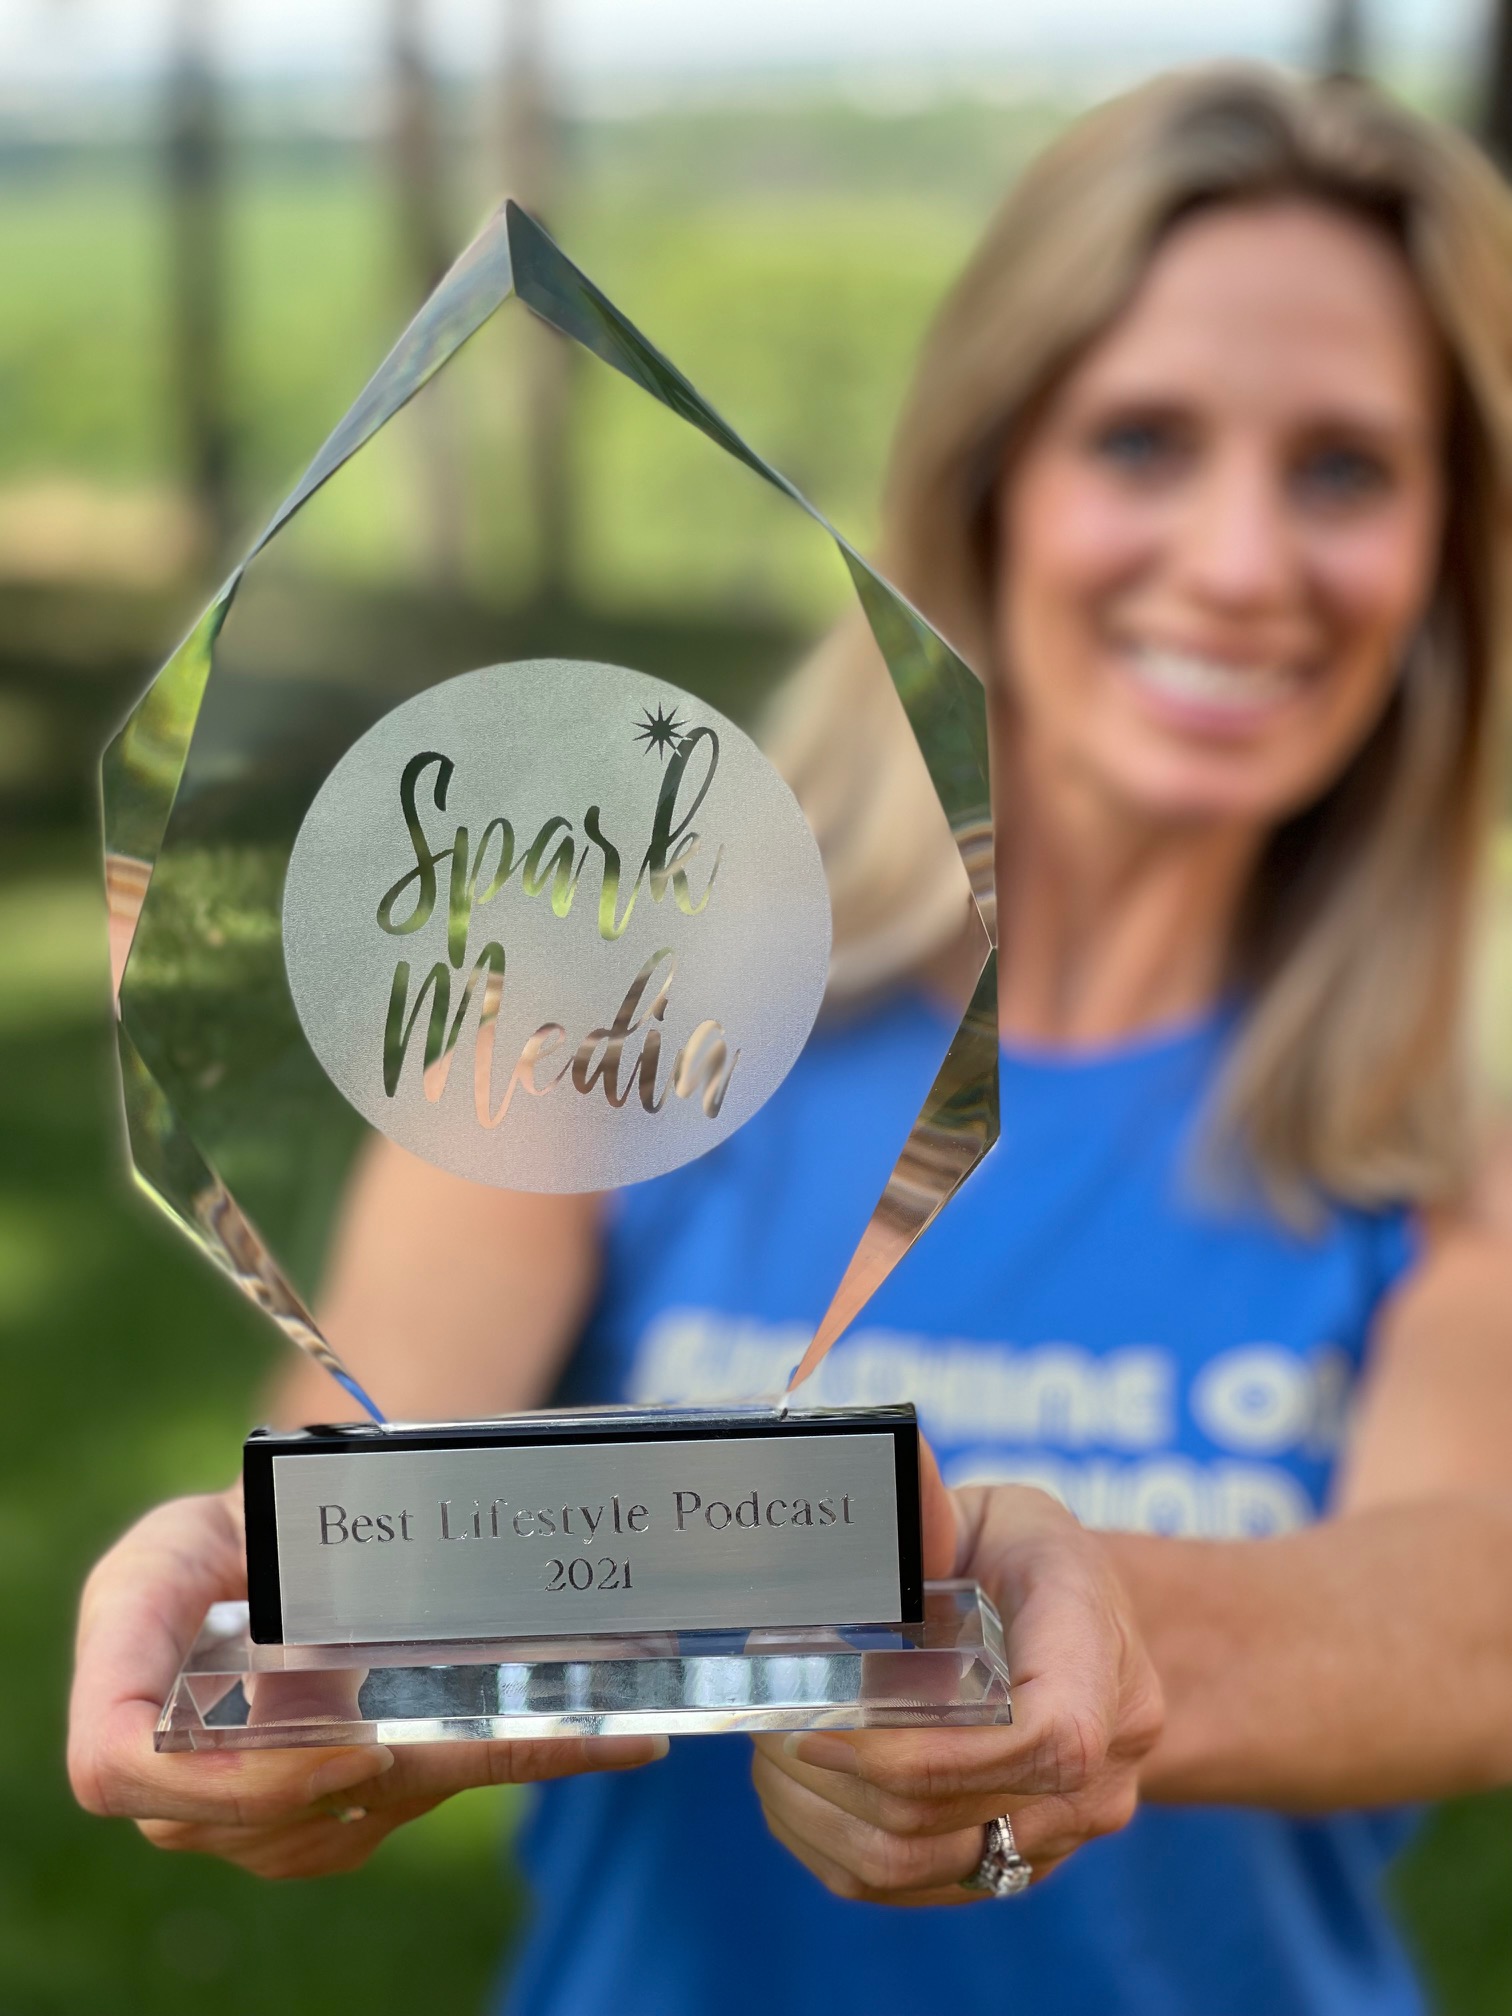 Won Best Lifestyle Podcast 2021 by Spark Media | Wendie Pett, Visibly Fit